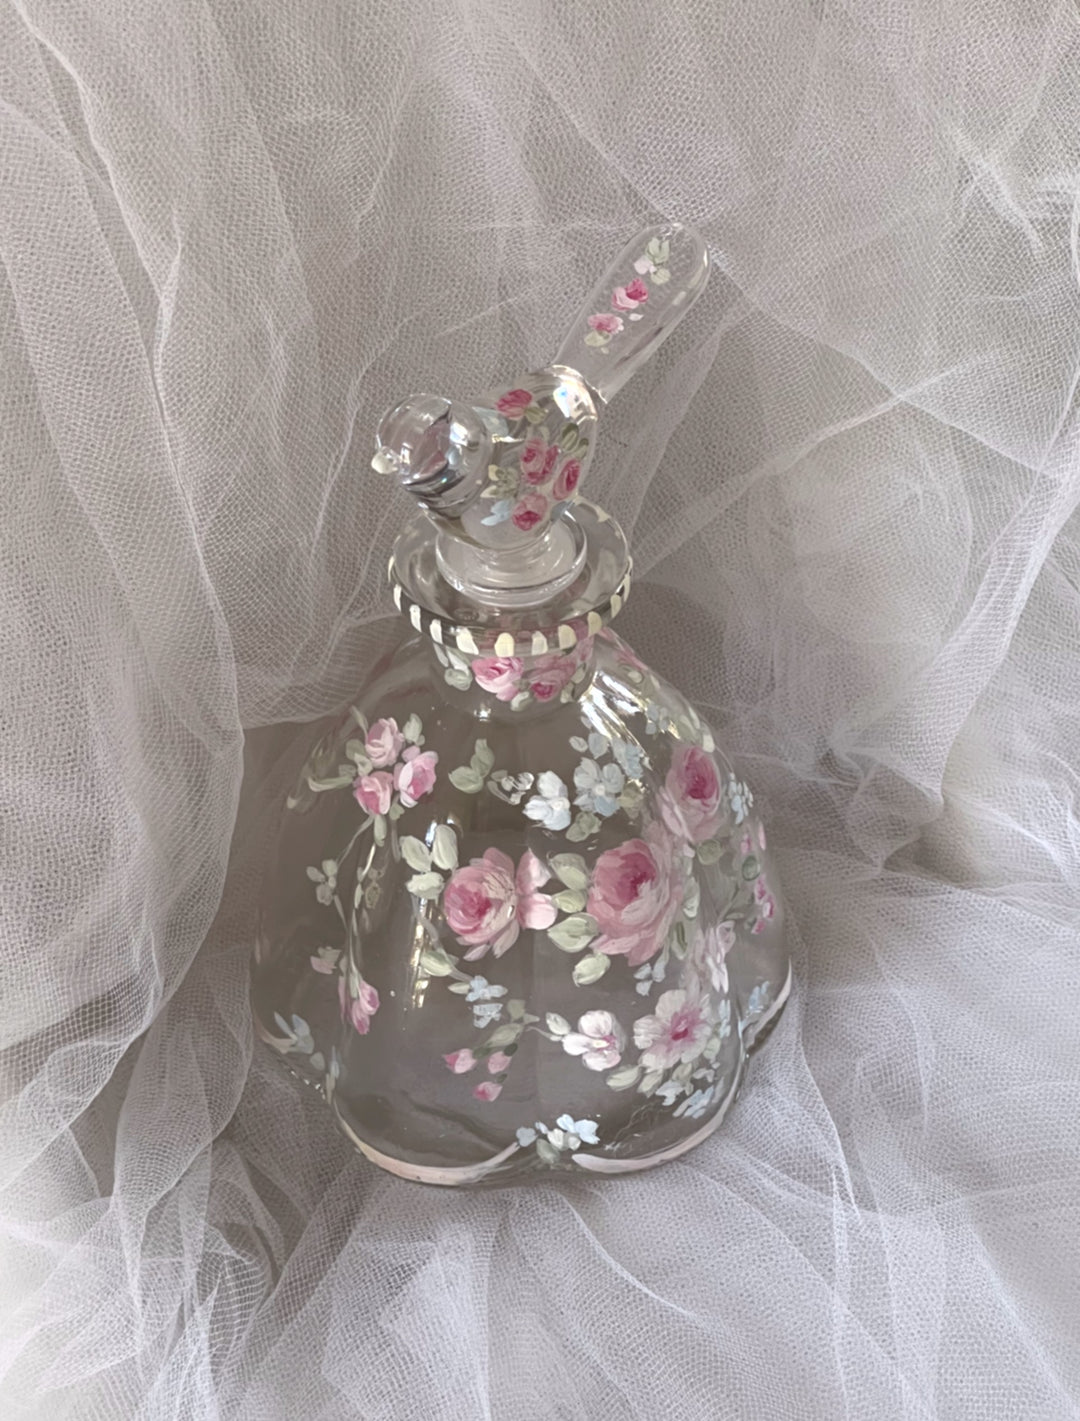 Shabby Chic French Roses Hand Painted Scalloped Edge Glass Perfume Bottle With Glass Bird Topper by Debi Coules